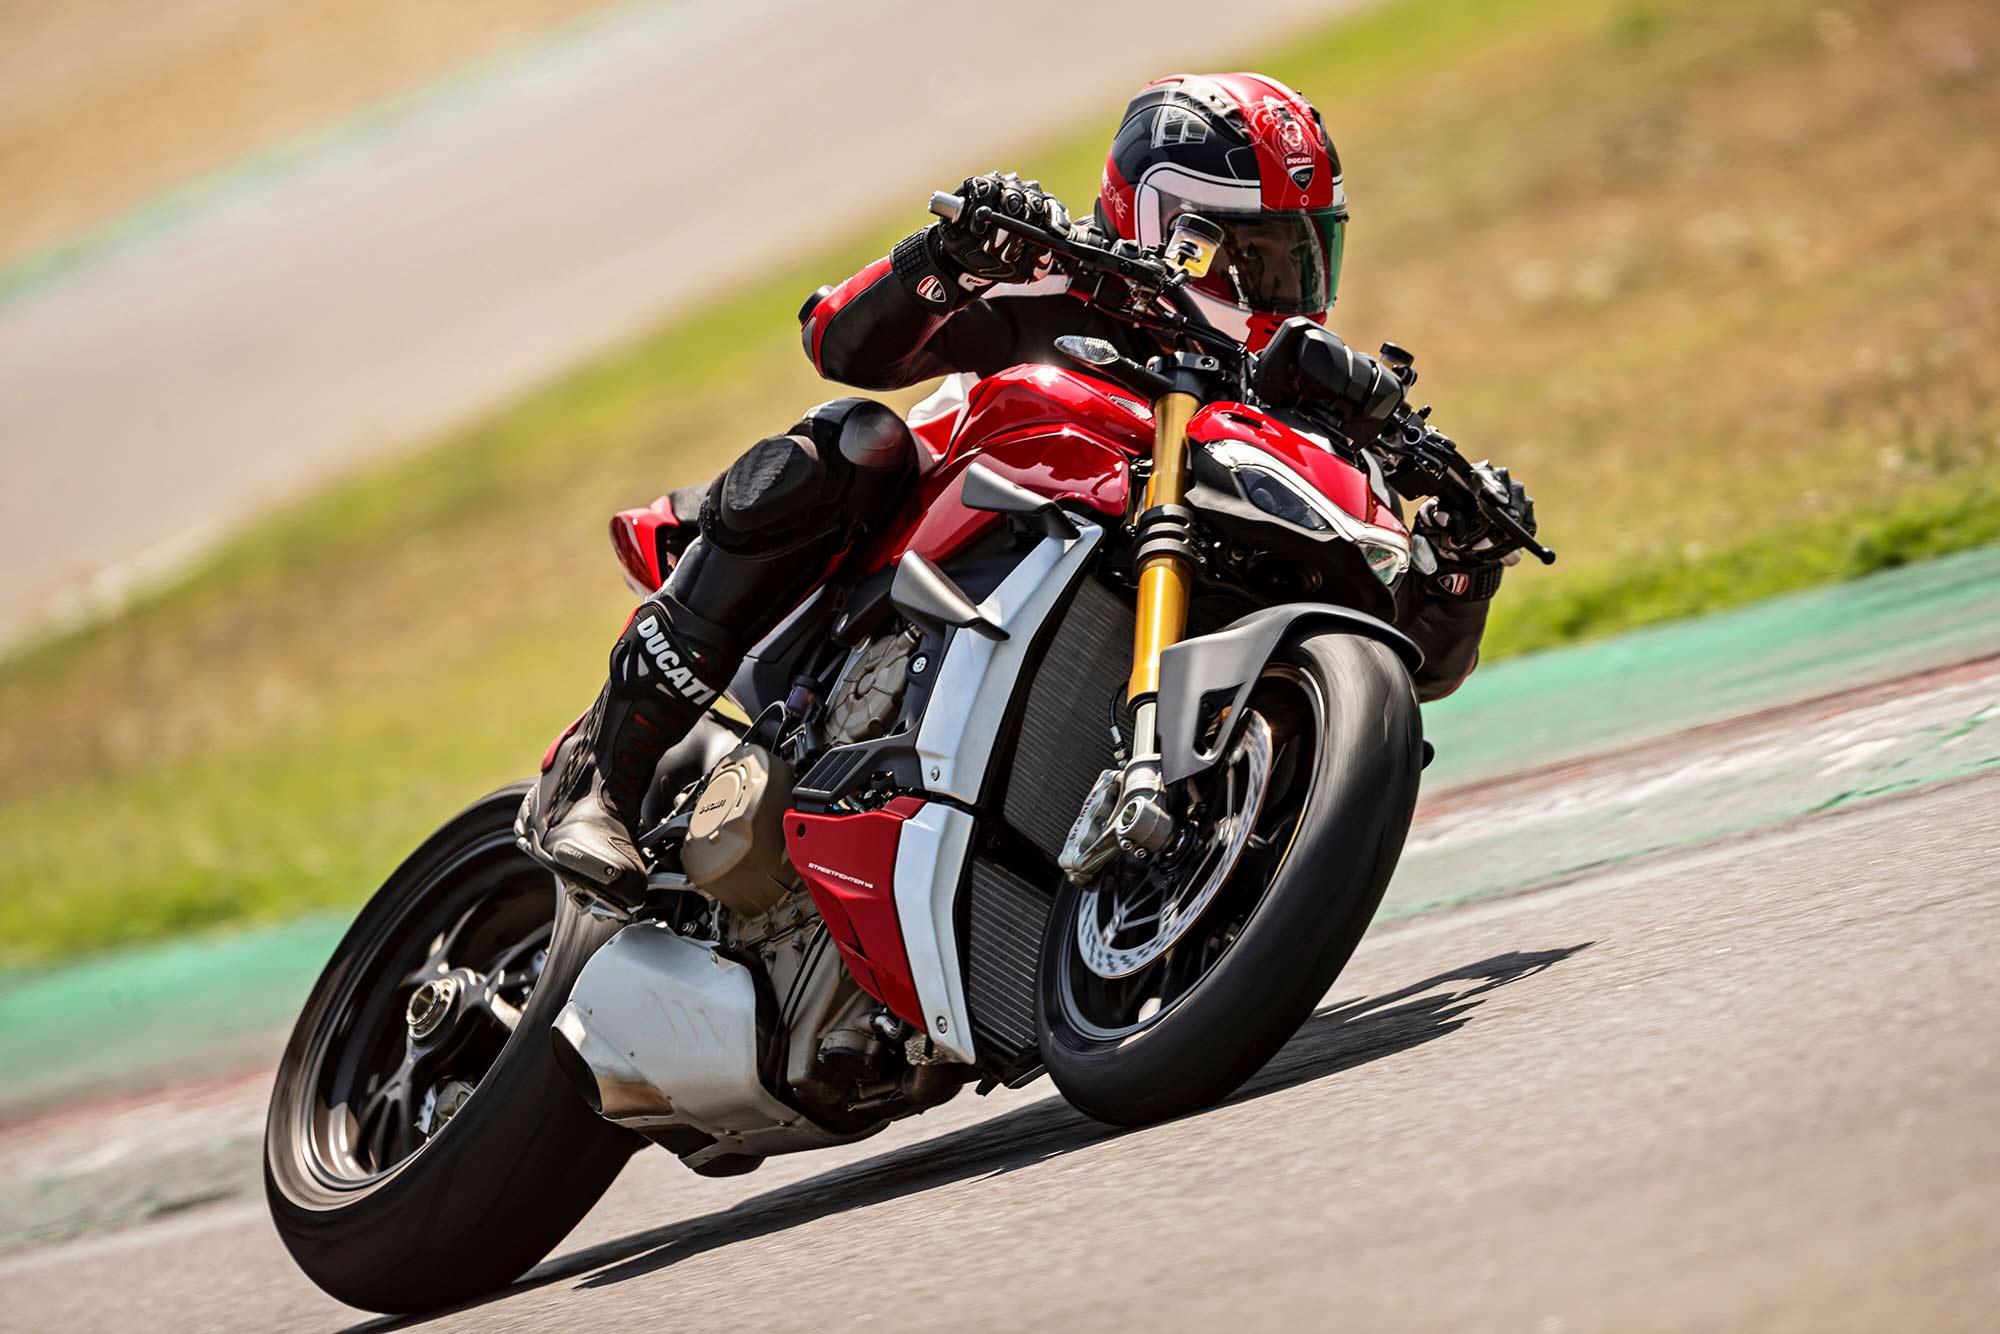 2021 Ducati Streetfighter V4/S Buyer's Guide: Specs, Photos, Price | Cycle  World